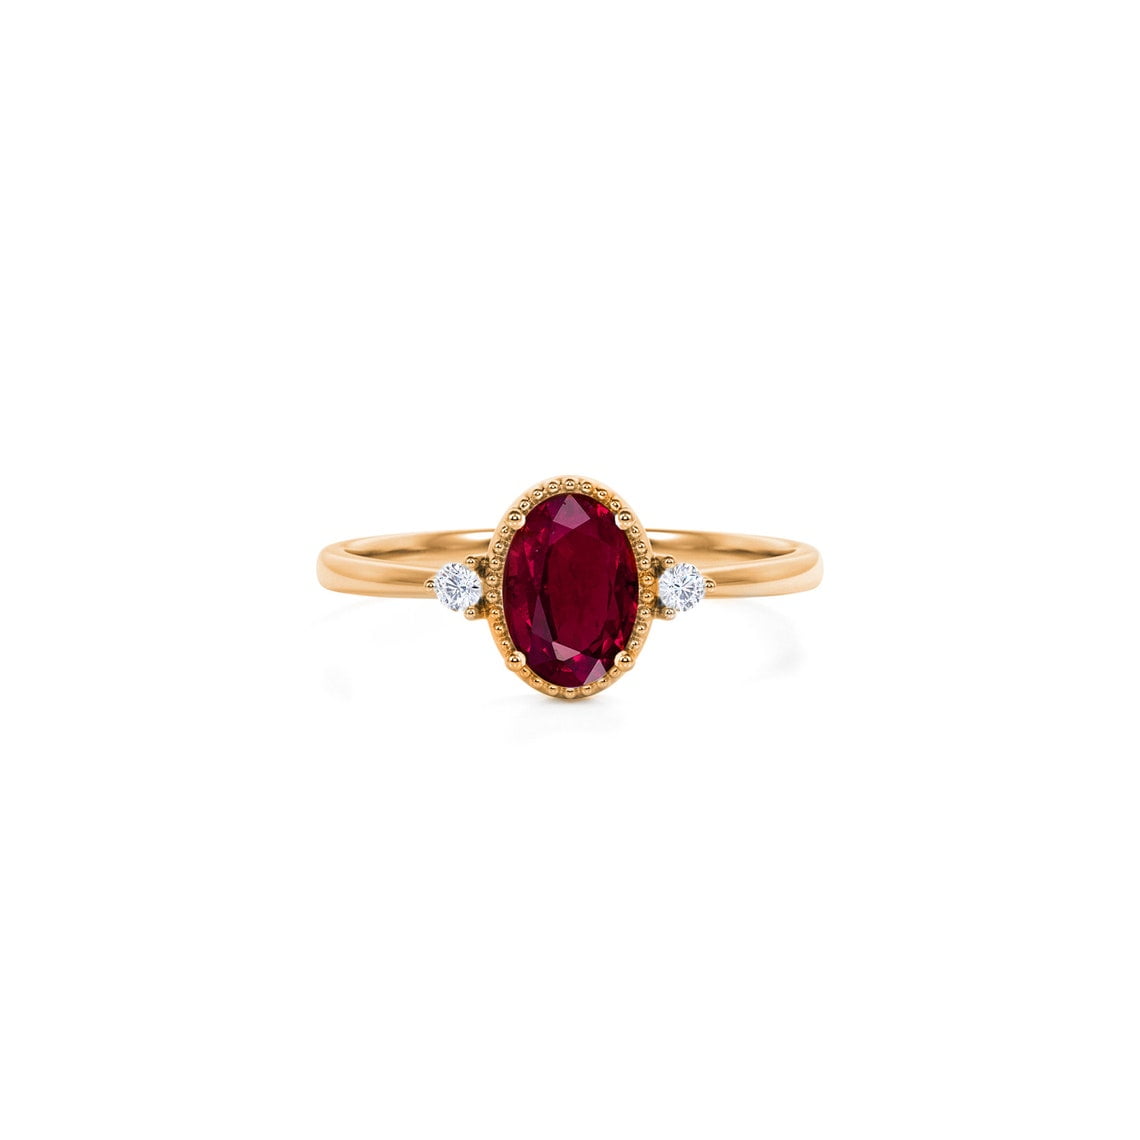 Buy Ruby Diamond Ring Online In India - Etsy India